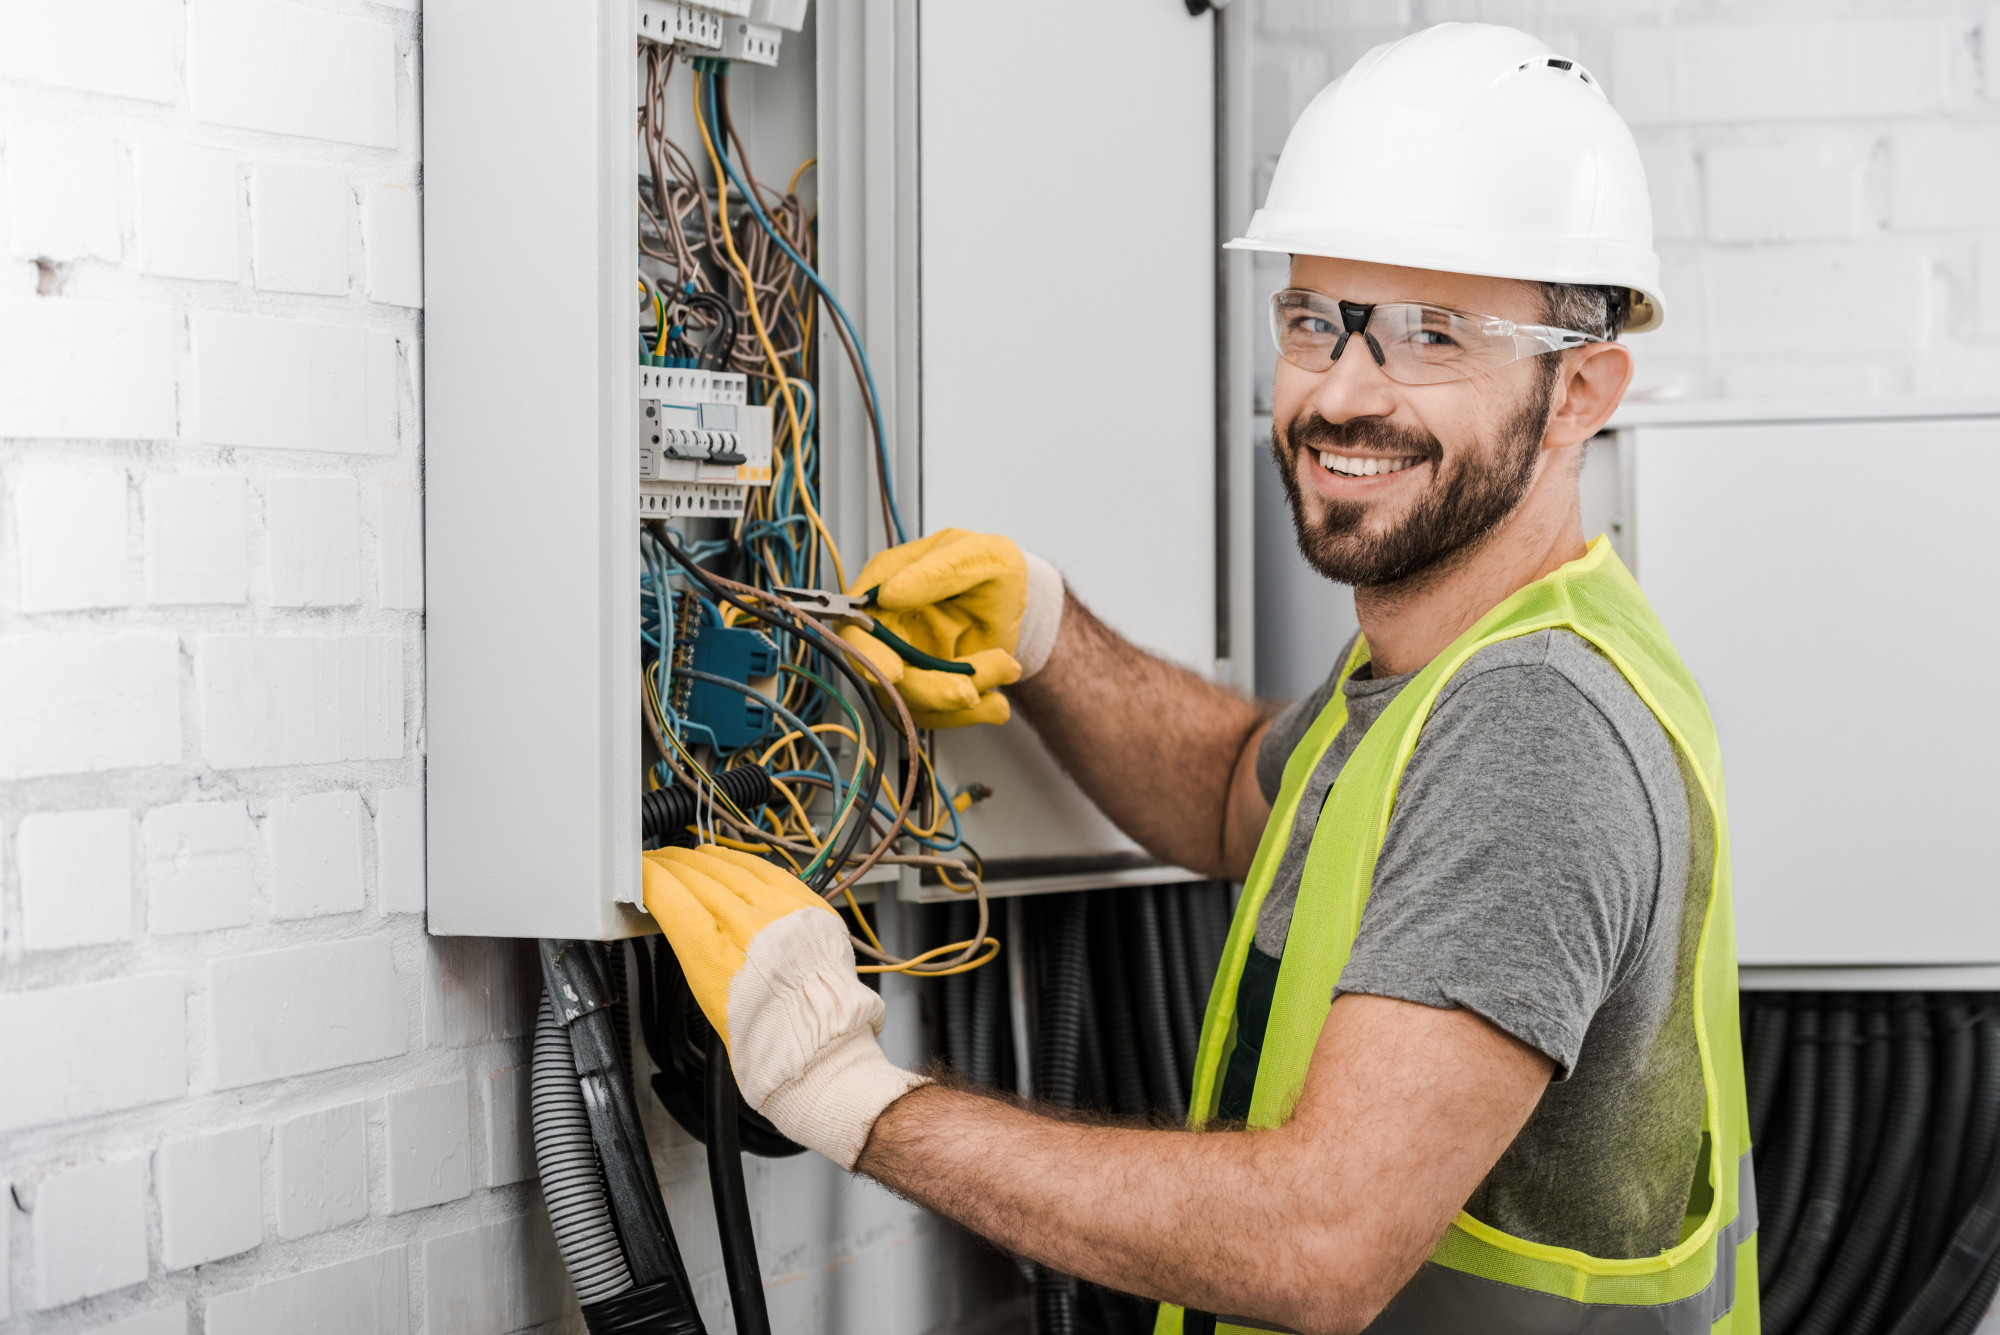 It's sometimes easy to miss signs that your electrics need attending to. So, keep reading for five signs you need to hire electrical services immediately.